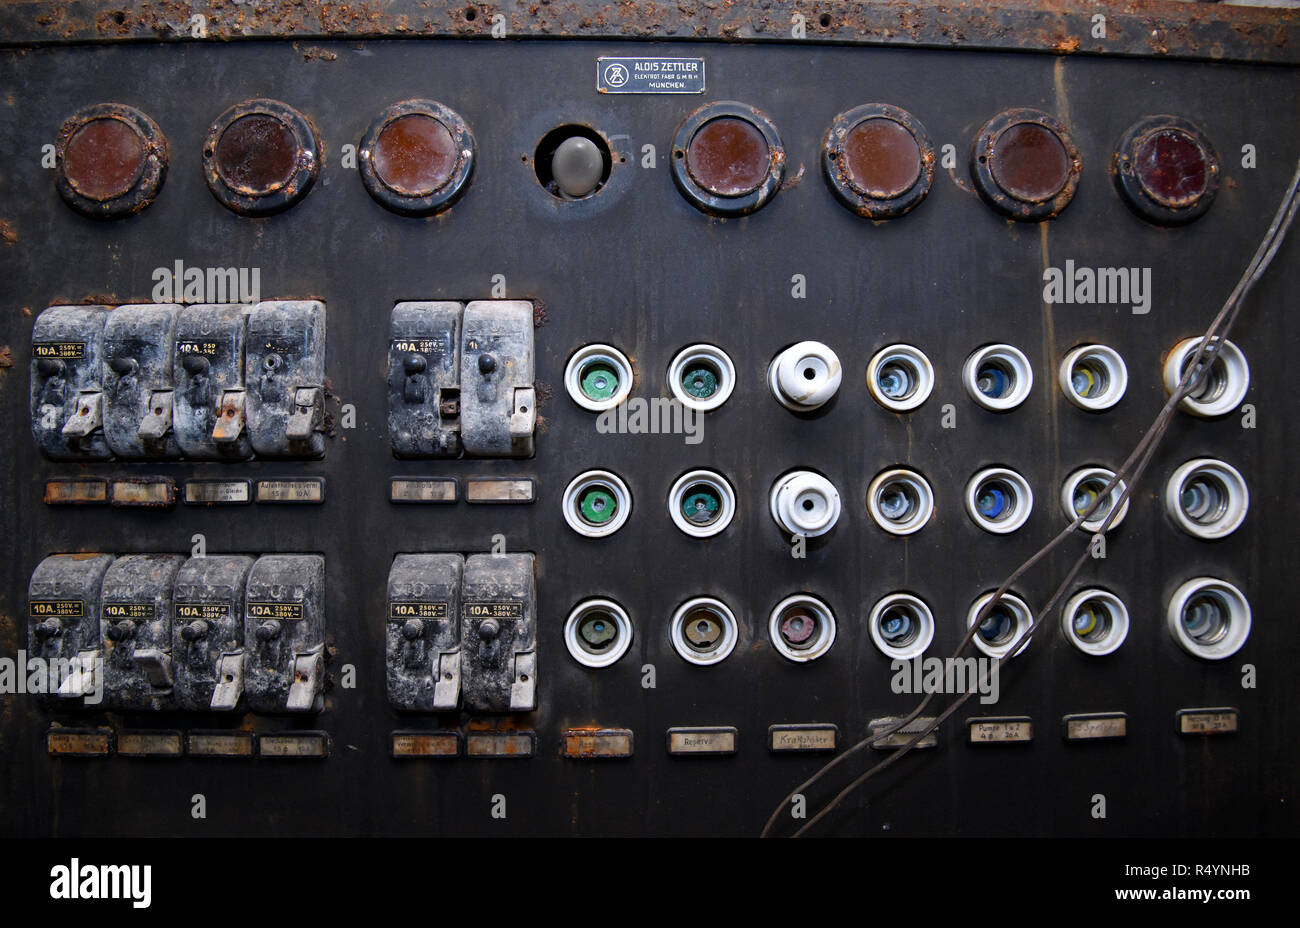 09 November 2018, Bavaria, Pullach: An old fuse box can be seen in a bunker under the presidential villa on the premises of the Federal Intelligence Service (BND). The villa was once the residence of Martin Bormann, head of the party office of the NSDAP and a confidant of Hitler, and belonged to the former Reichssiedlung Rudolf Heß which was built between 1936 and 1938. From 1947, the buildings were used by the Gehlen organization and later by the Federal Intelligence Service (BND). The Federal Intelligence Service has moved from Pullach to its new headquarters in the middle of Berlin. It was Stock Photo